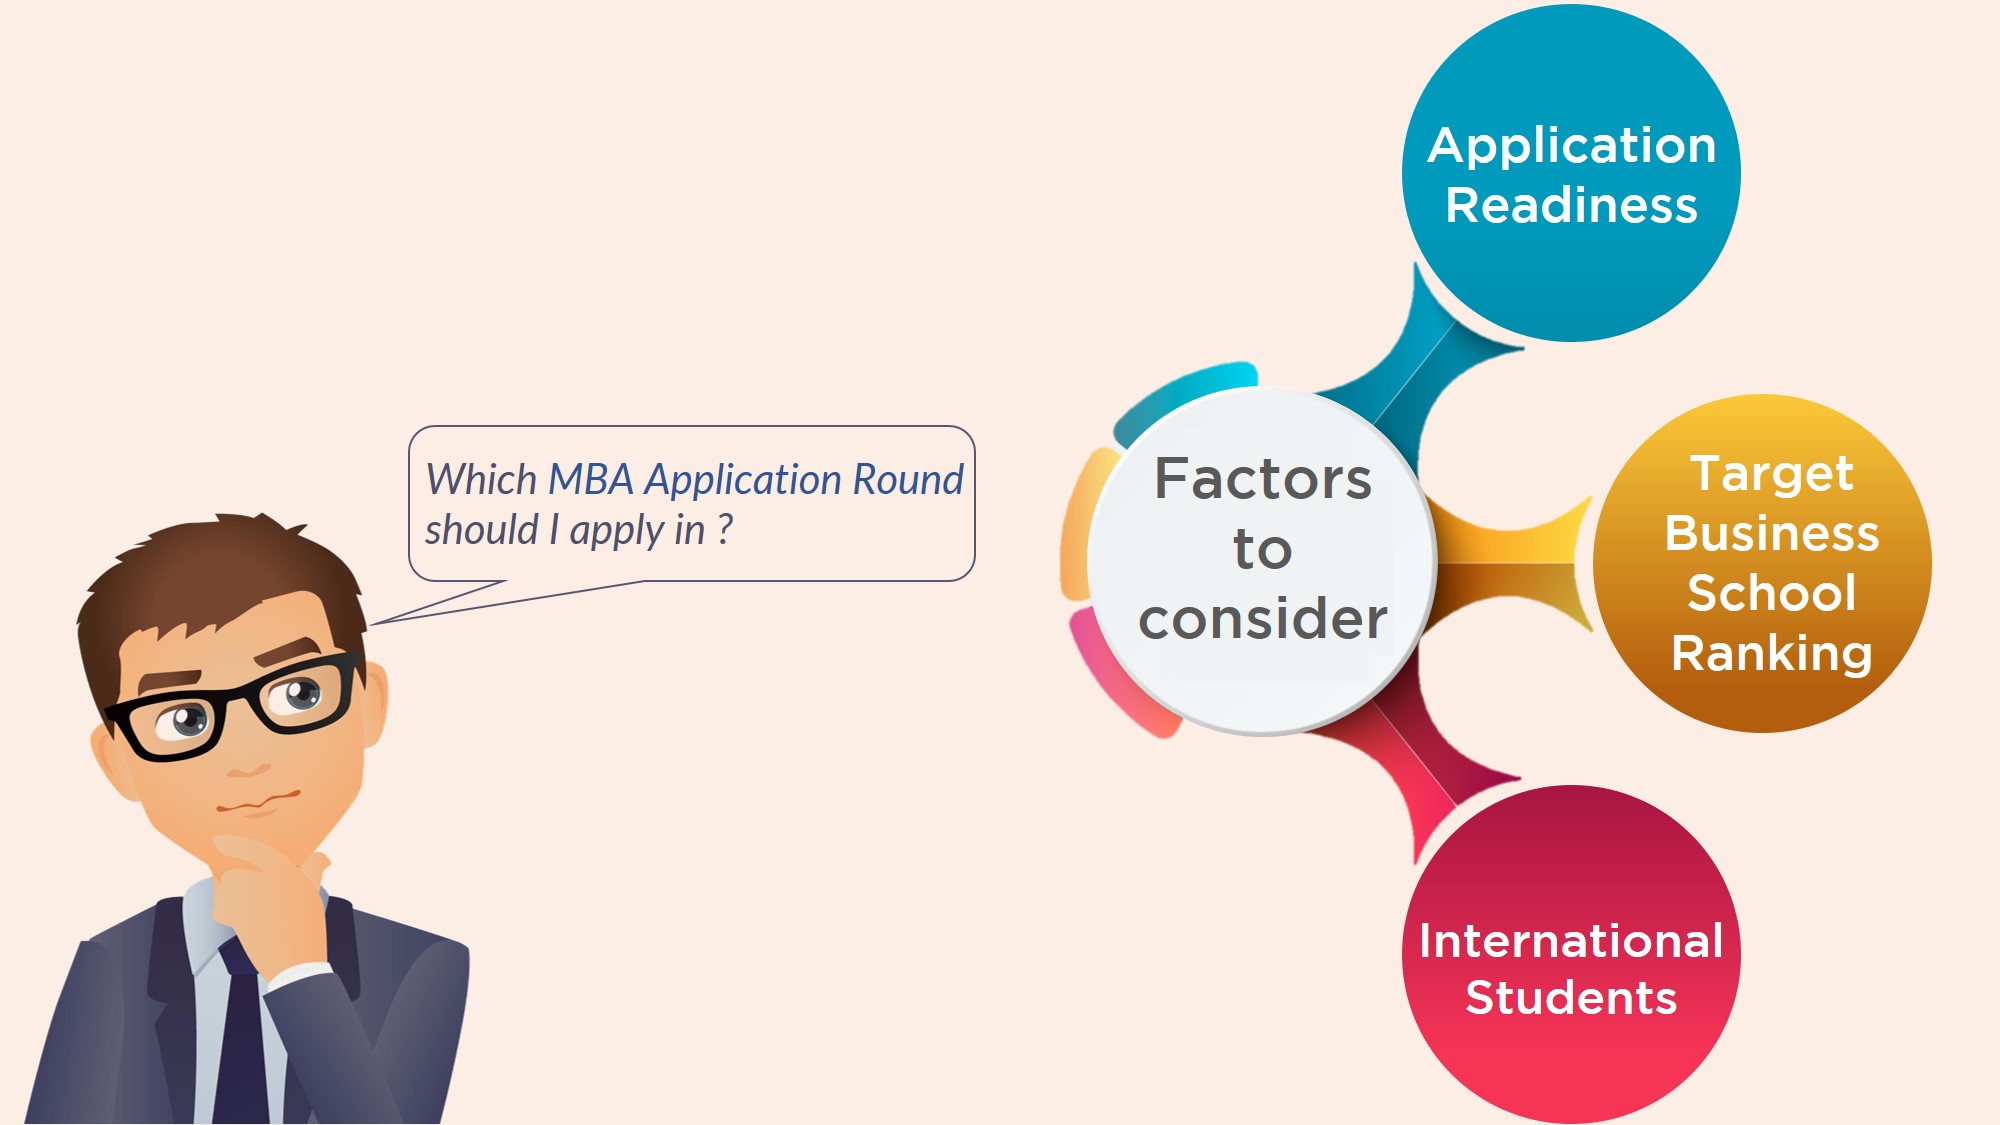 Round 1 vs Round 2 – Which MBA Application Round should I apply in?